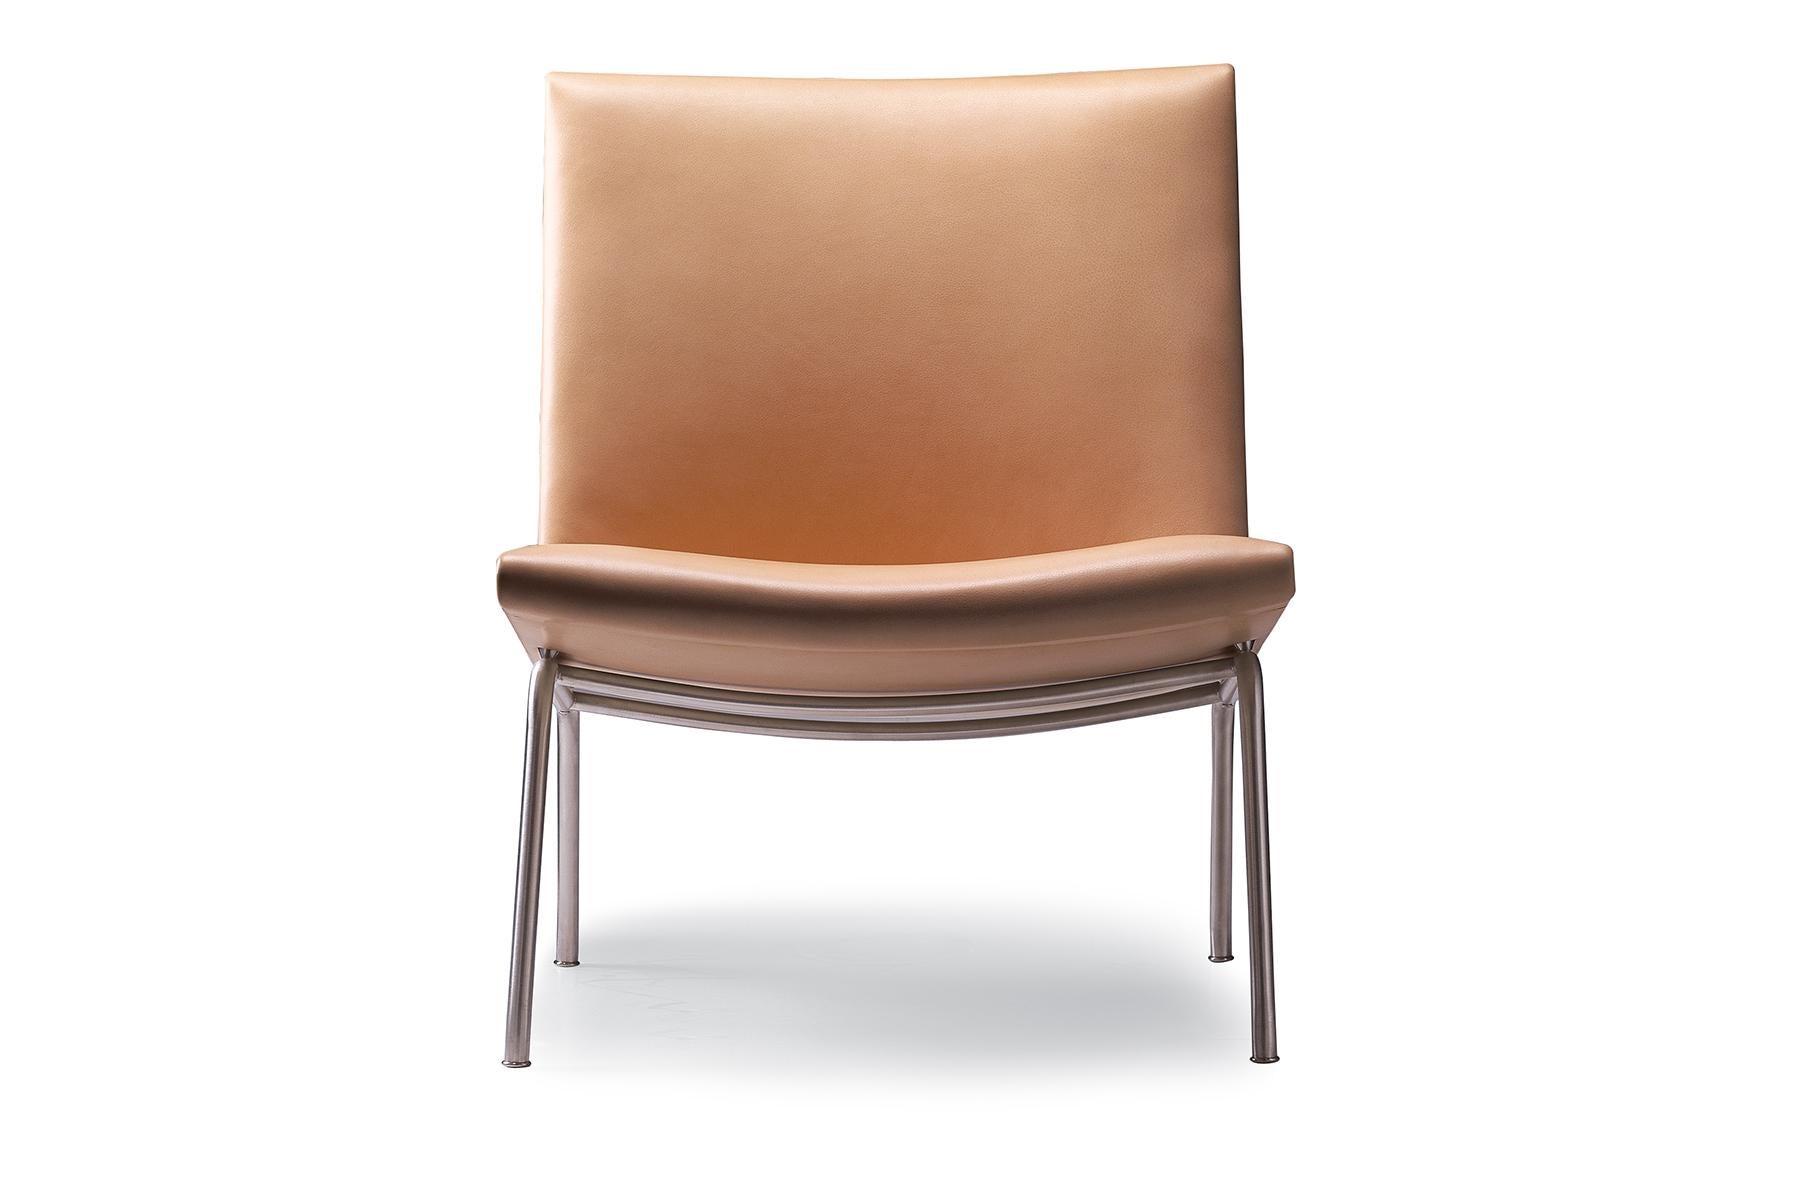 Hans J. Wegner chose to use stainless steel in a durable and modern design, upholstered in either leather or fabric, for his CH401 lounge chair. The chair is part of the Kastrup Series that Wegner perfected for private and public spaces. Among